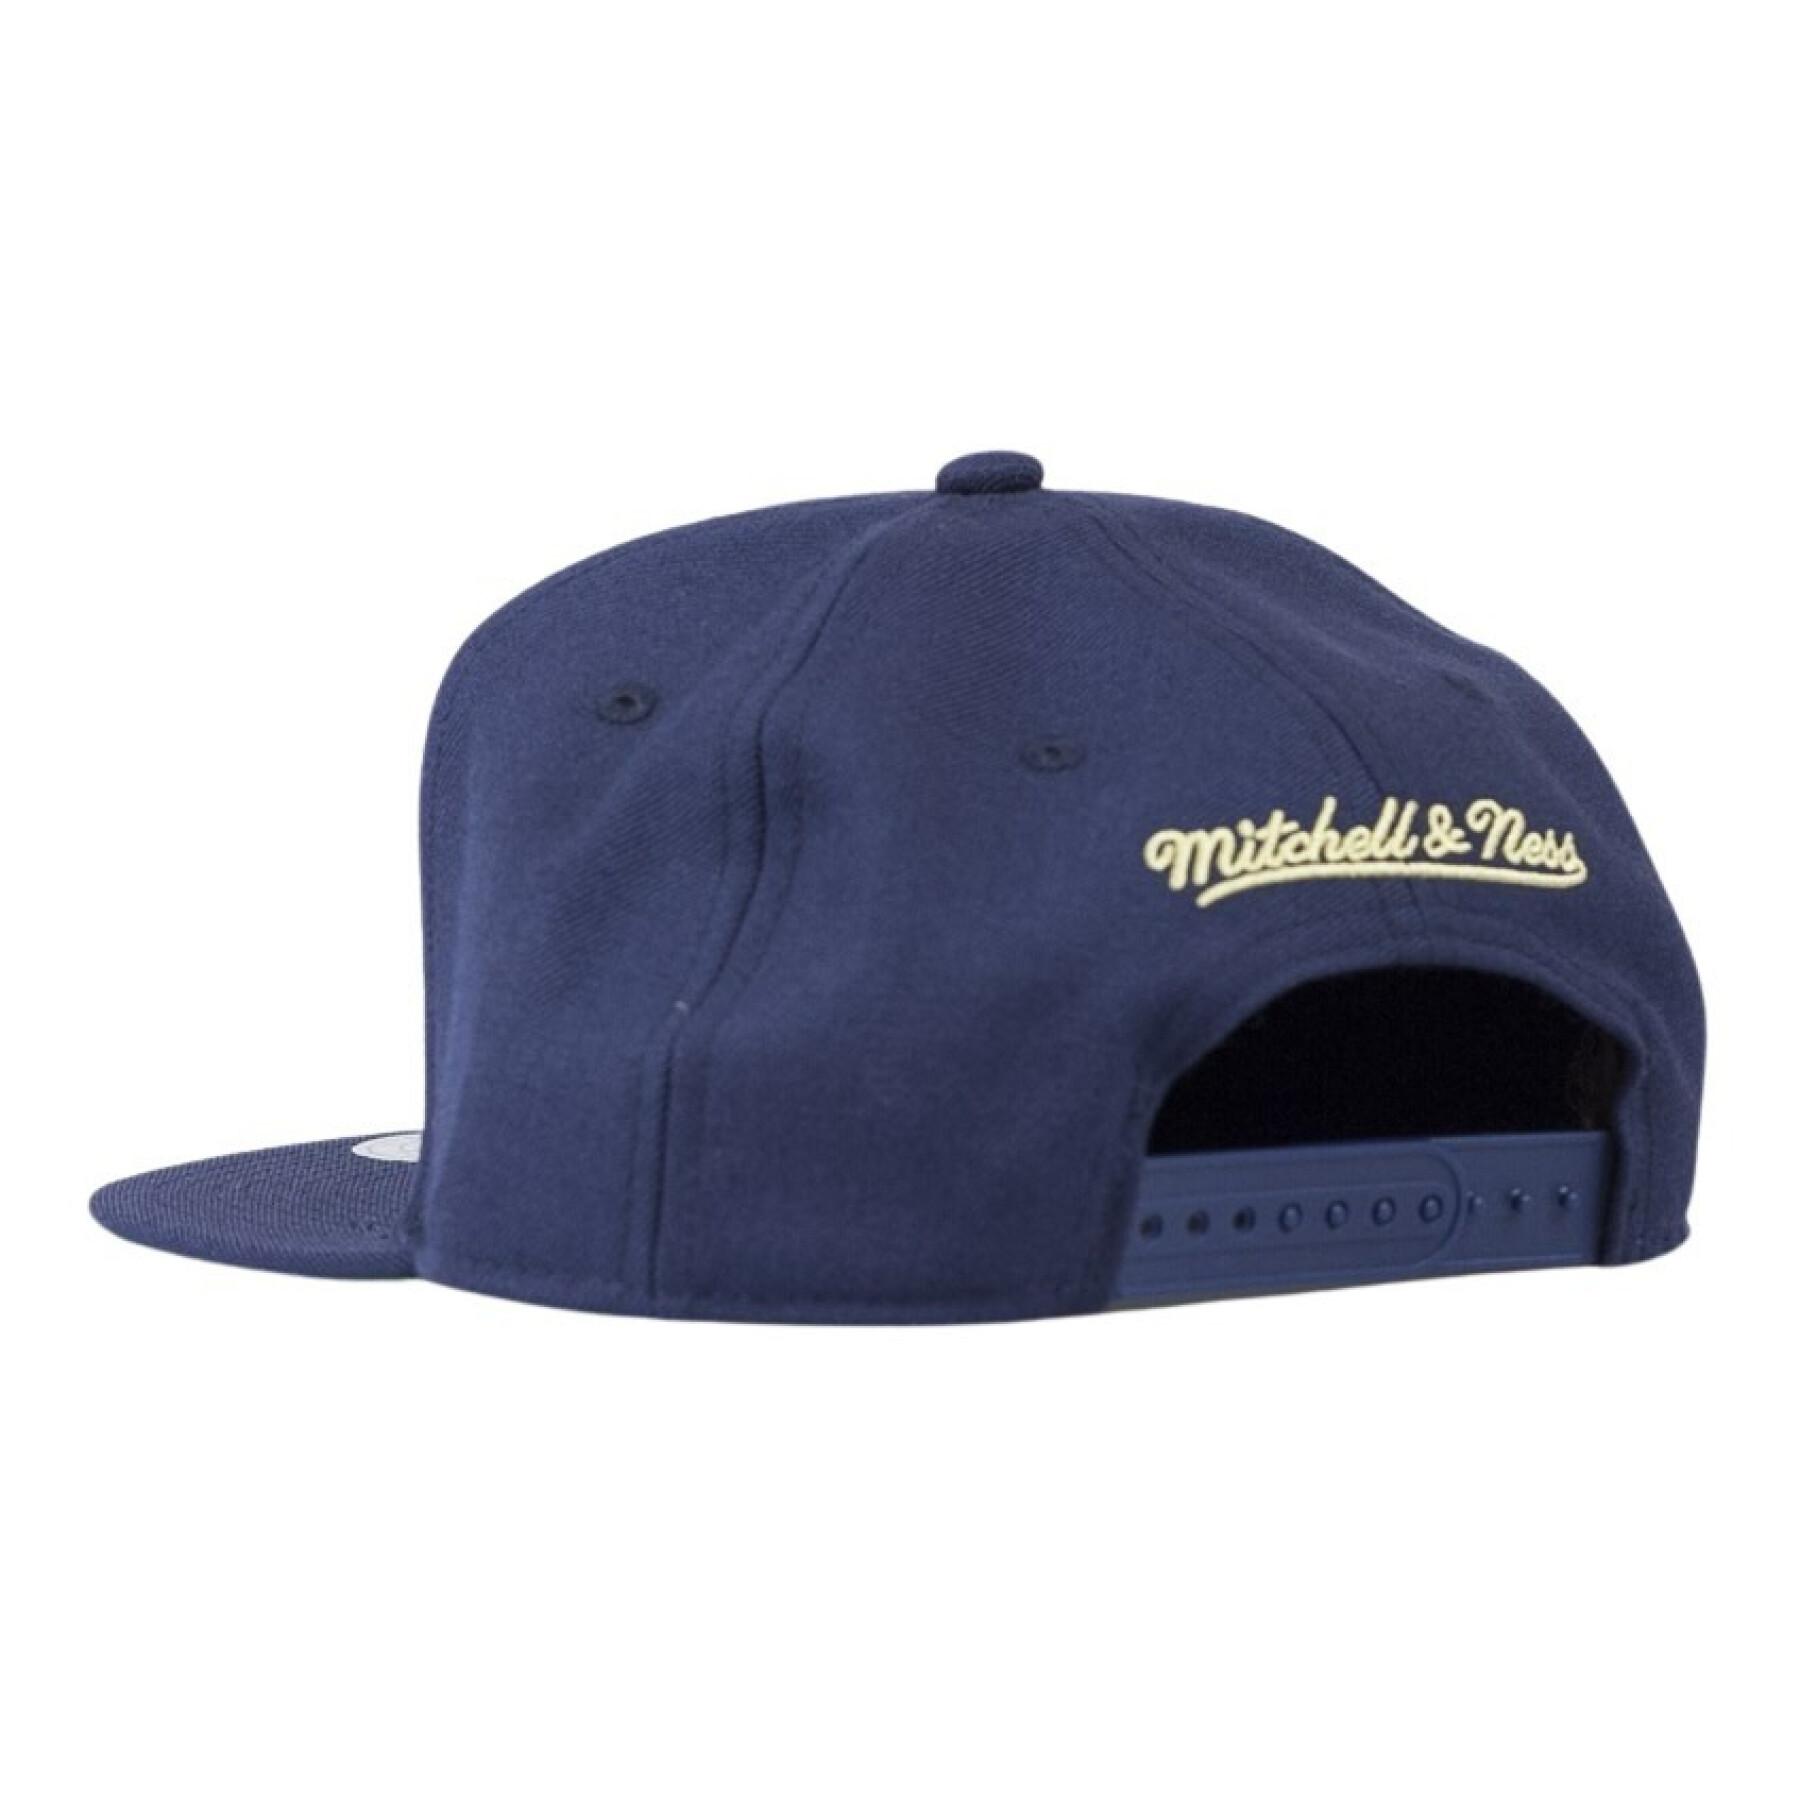 Cap New Orleans Pelicans wool solid 2 current